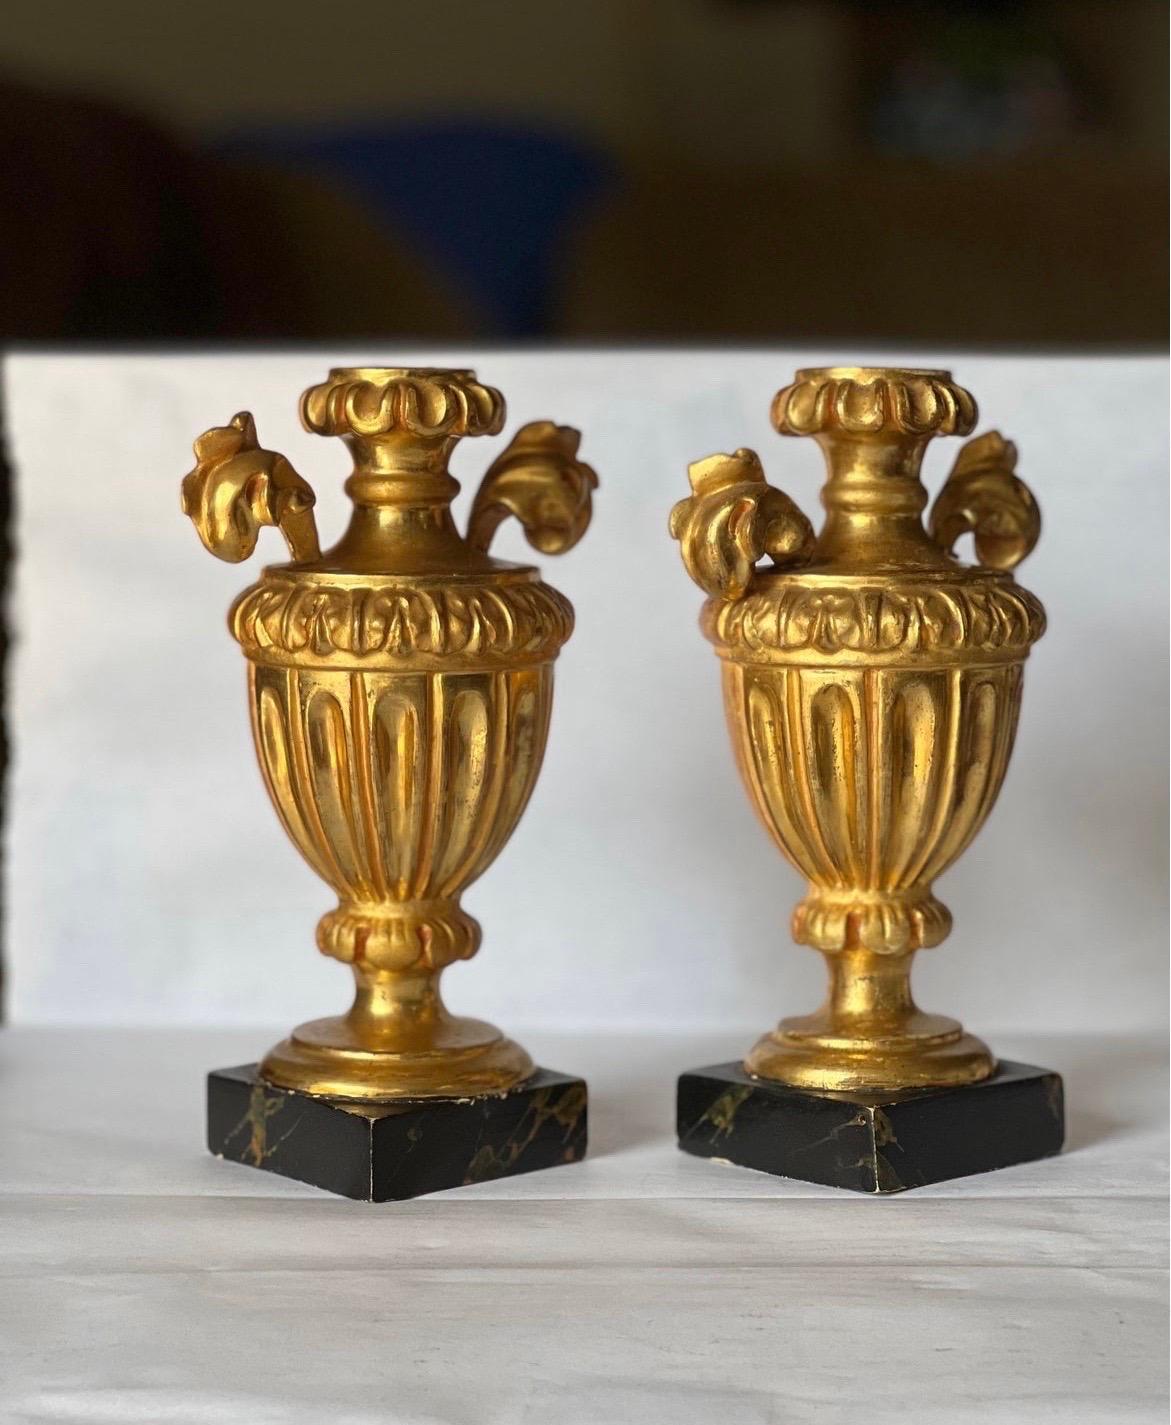 Pair Italian Neoclassical Carved Gilt Wood Ornamental Urns on Faux Marble Bases For Sale 1